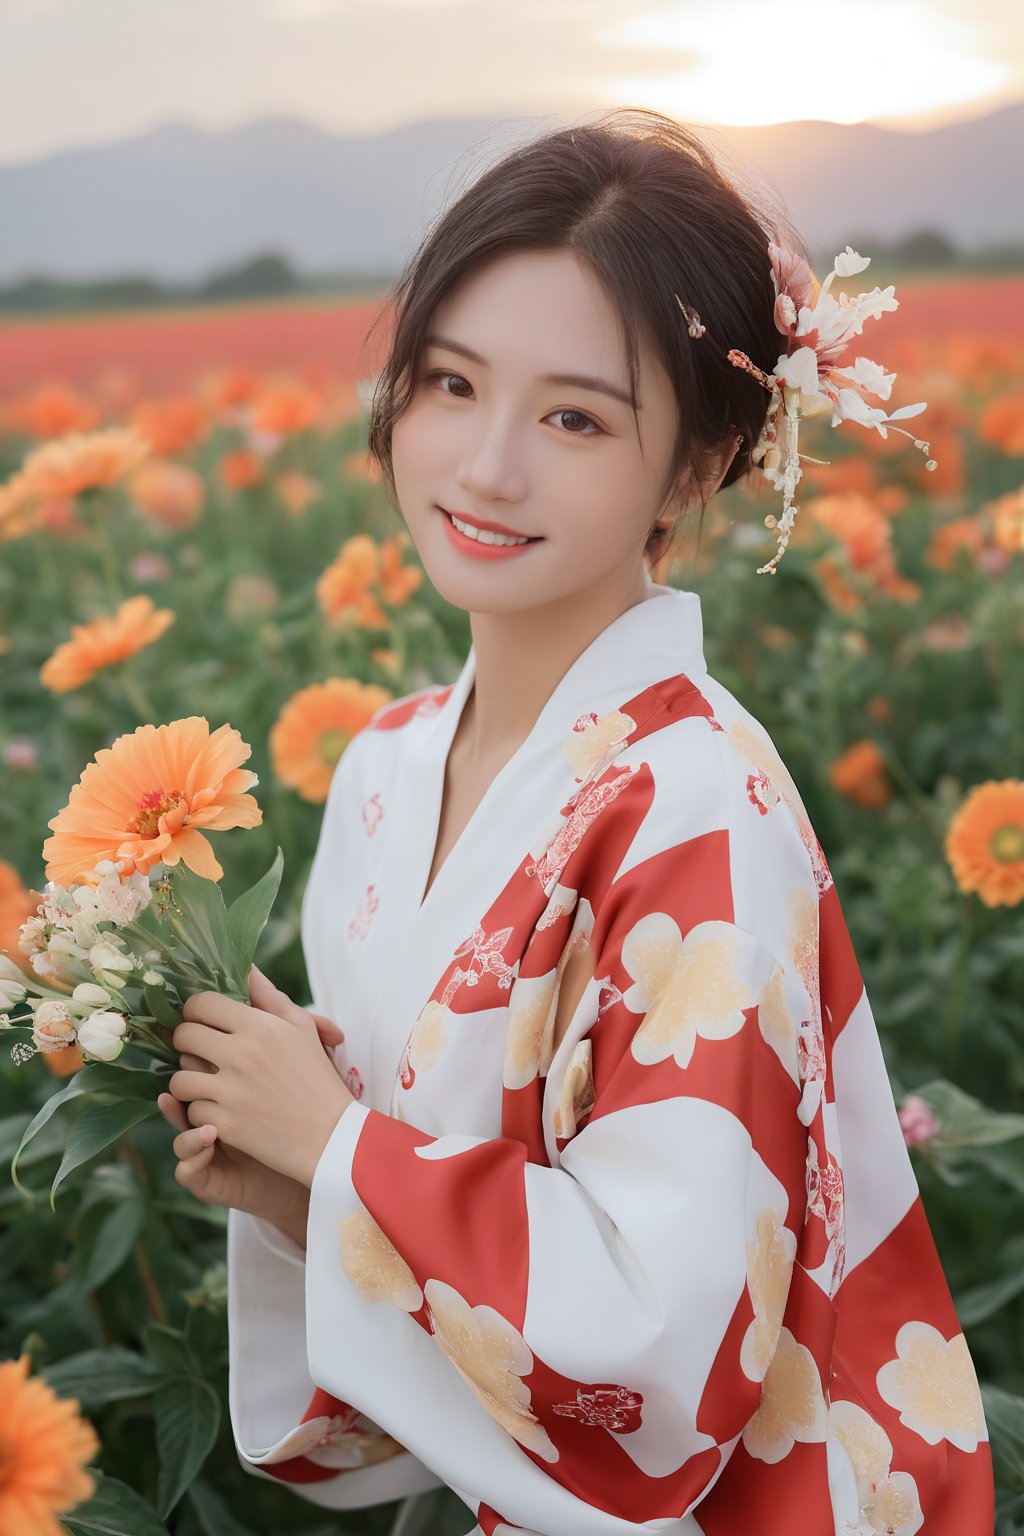 Surreal Portrait Photography of hubggirl, 
ultra realistic,best quality ,photorealistic,Extremely Realistic, in depth, cinematic light,

Japanese girl, Hair Ornament, Hairpin, Comb, Kimono, Light smile, looking at camera, cowboy shot, flower field, dramatic composition with sunset, dynamic pose,  

perfect hands, perfect lighting, vibrant colors, intricate details, high detailed skin, intricate background, 
realistic, raw, analog, taken by Canon EOS,SIGMA Art Lens 35mm F1.4,ISO 200 Shutter Speed 2000,Vivid picture, 